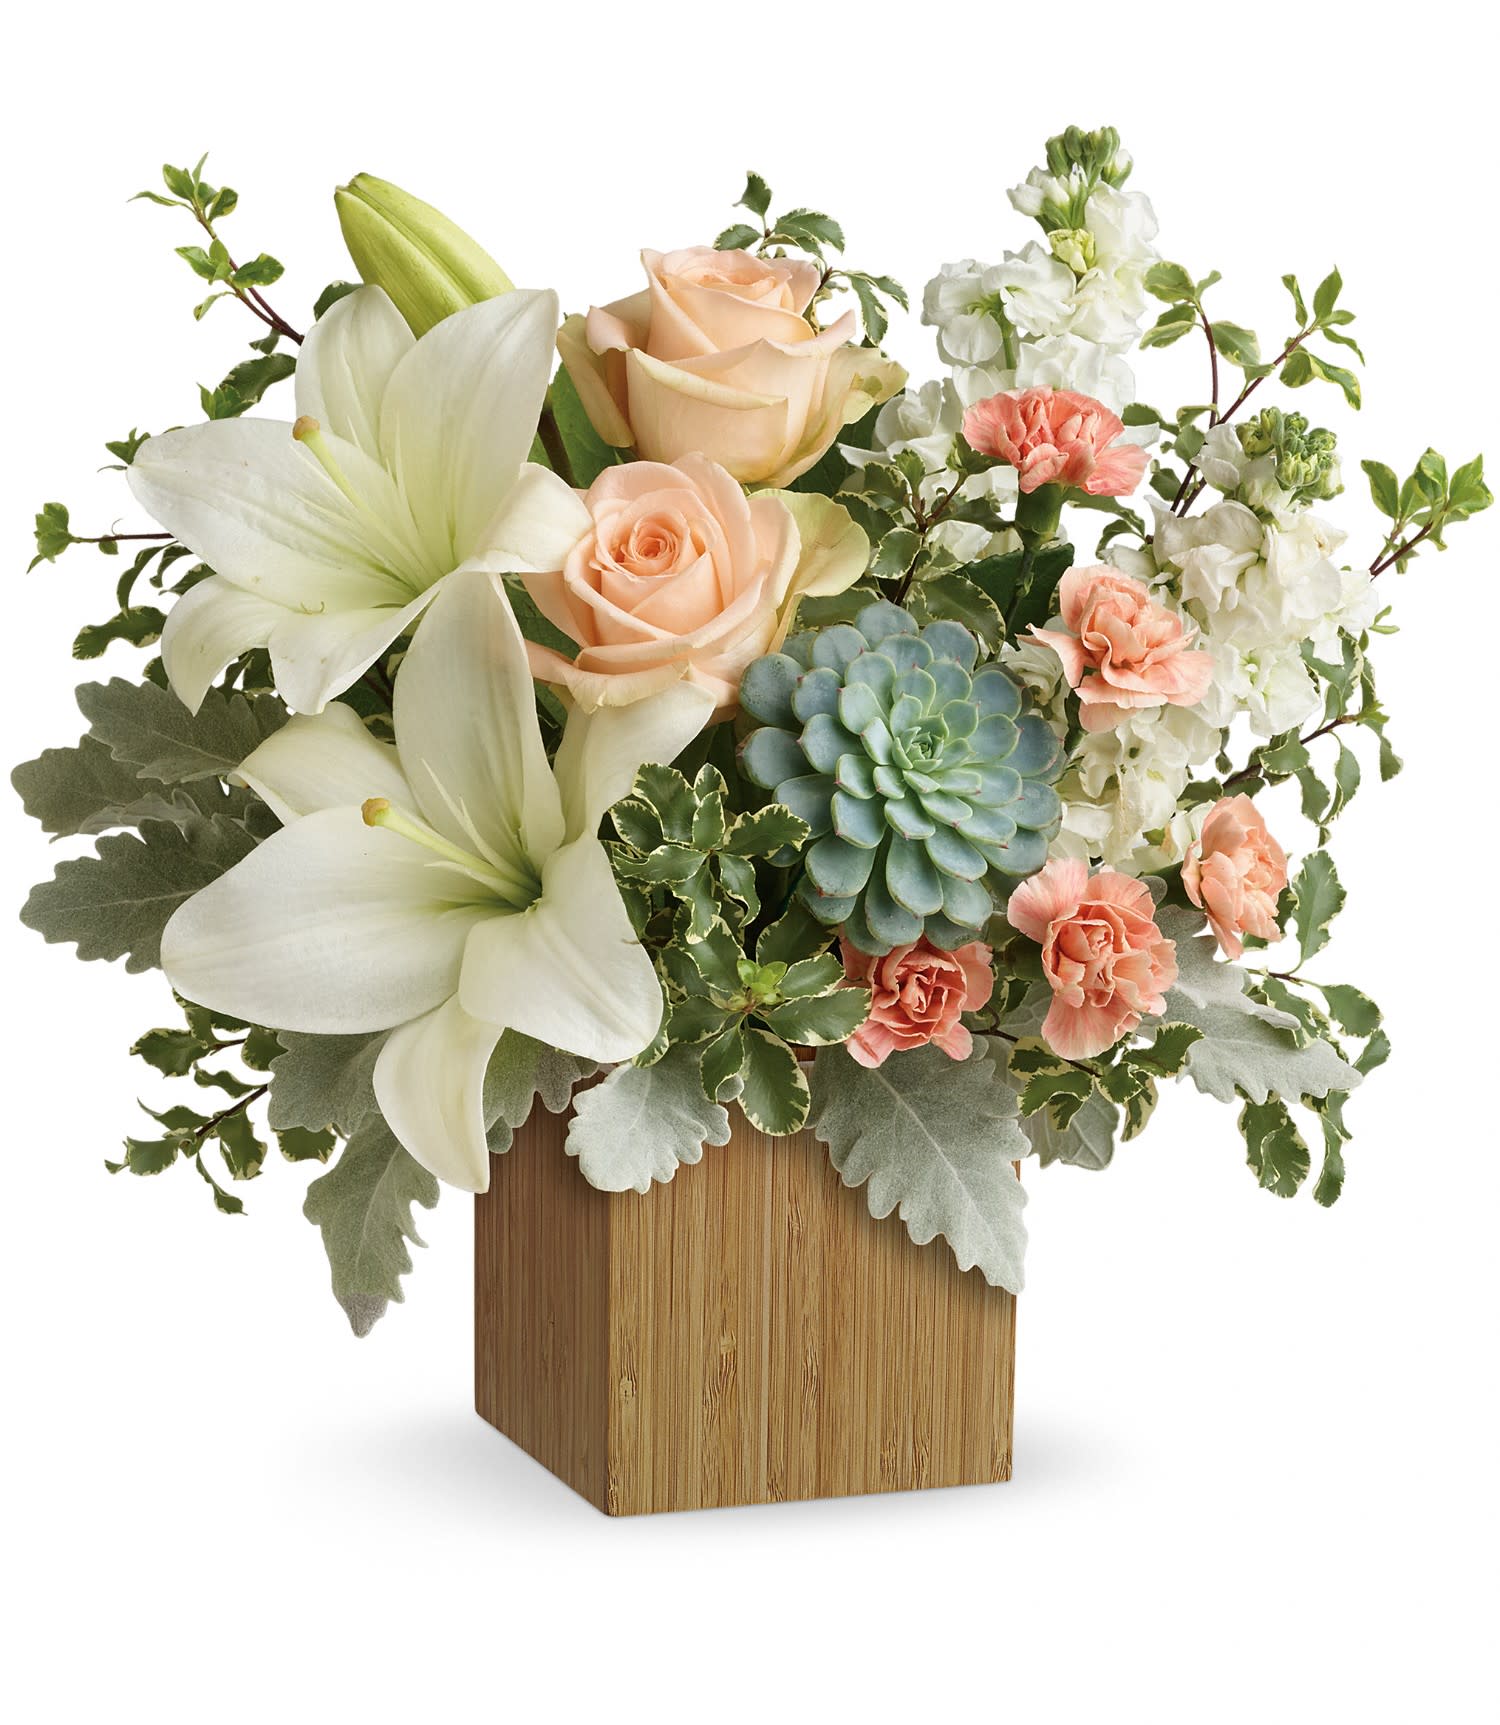 Desert Sunrise Bouquet - Peaceful yet energizing, this unforgettable arrangement of desert-hued blooms and succulents in a sleek bamboo cube is a chic gift on any special occasion. 